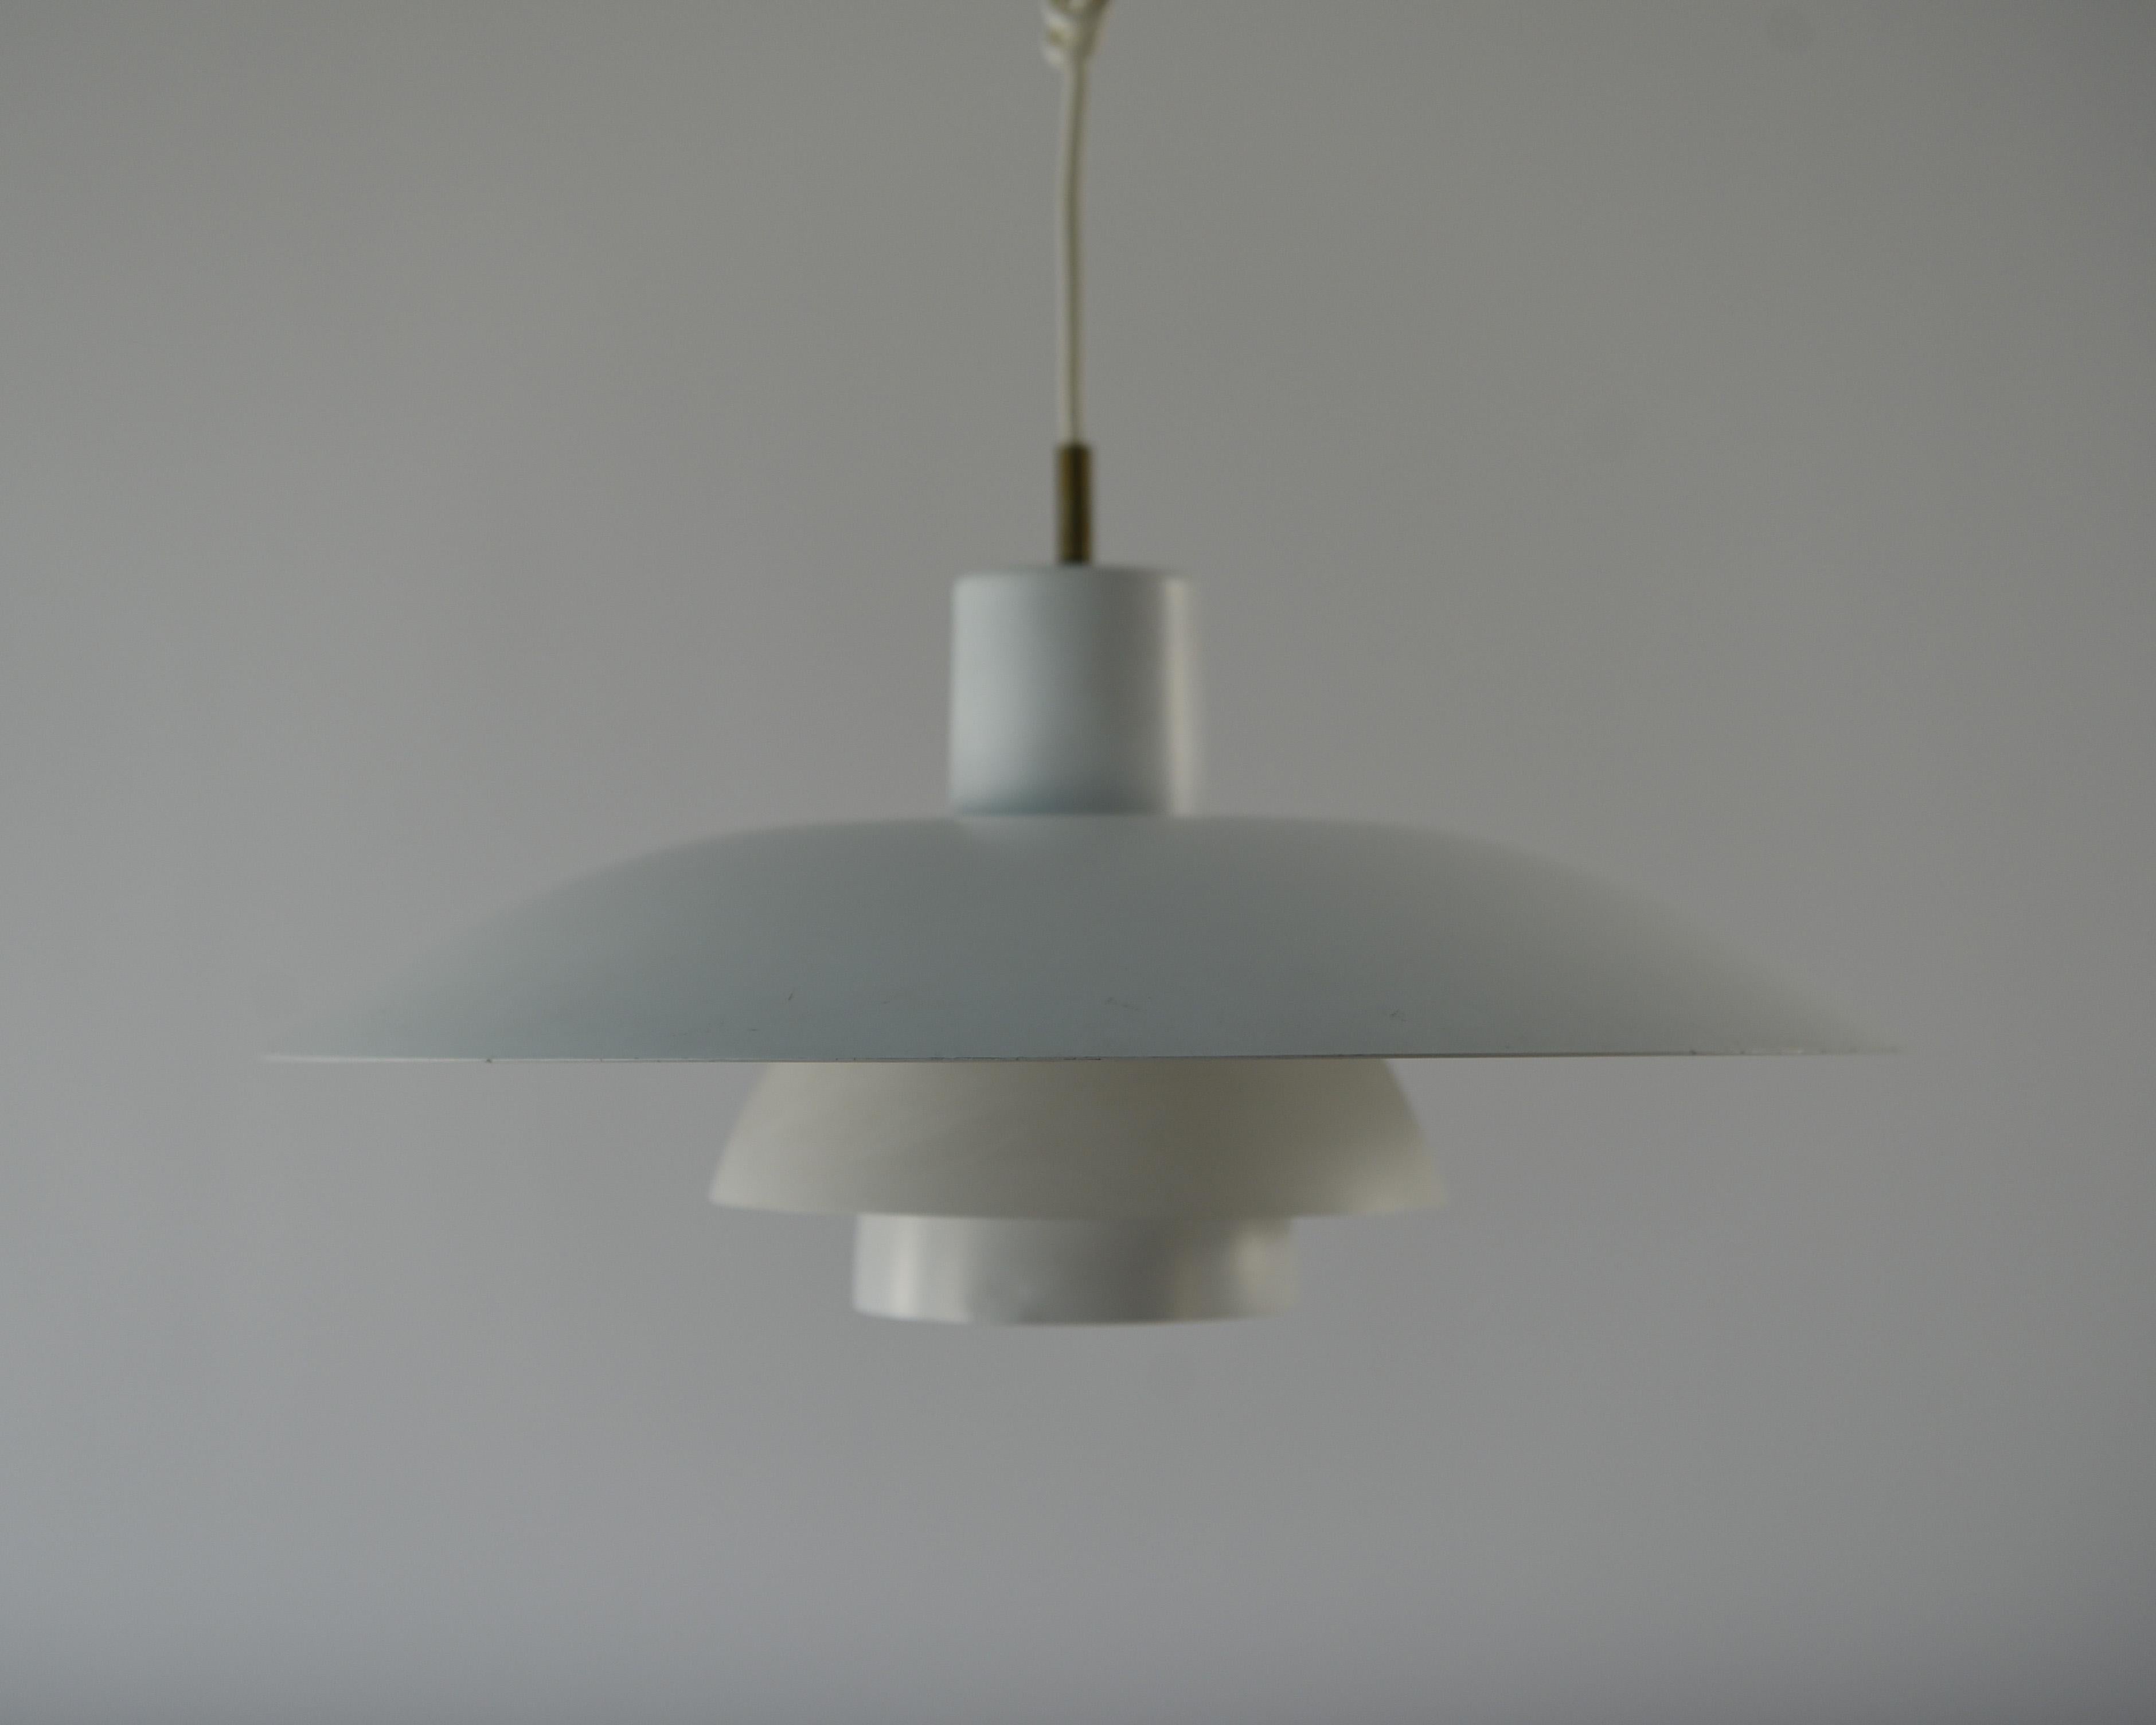 This PH4 lamp was produced in the 1950s by Louis Poulsen and designed by Poul Henningsen. This pendant light features layered shades to soften and disperse light effectively, a design fundamental to Henningsen's goal. As this lamp is in a simple